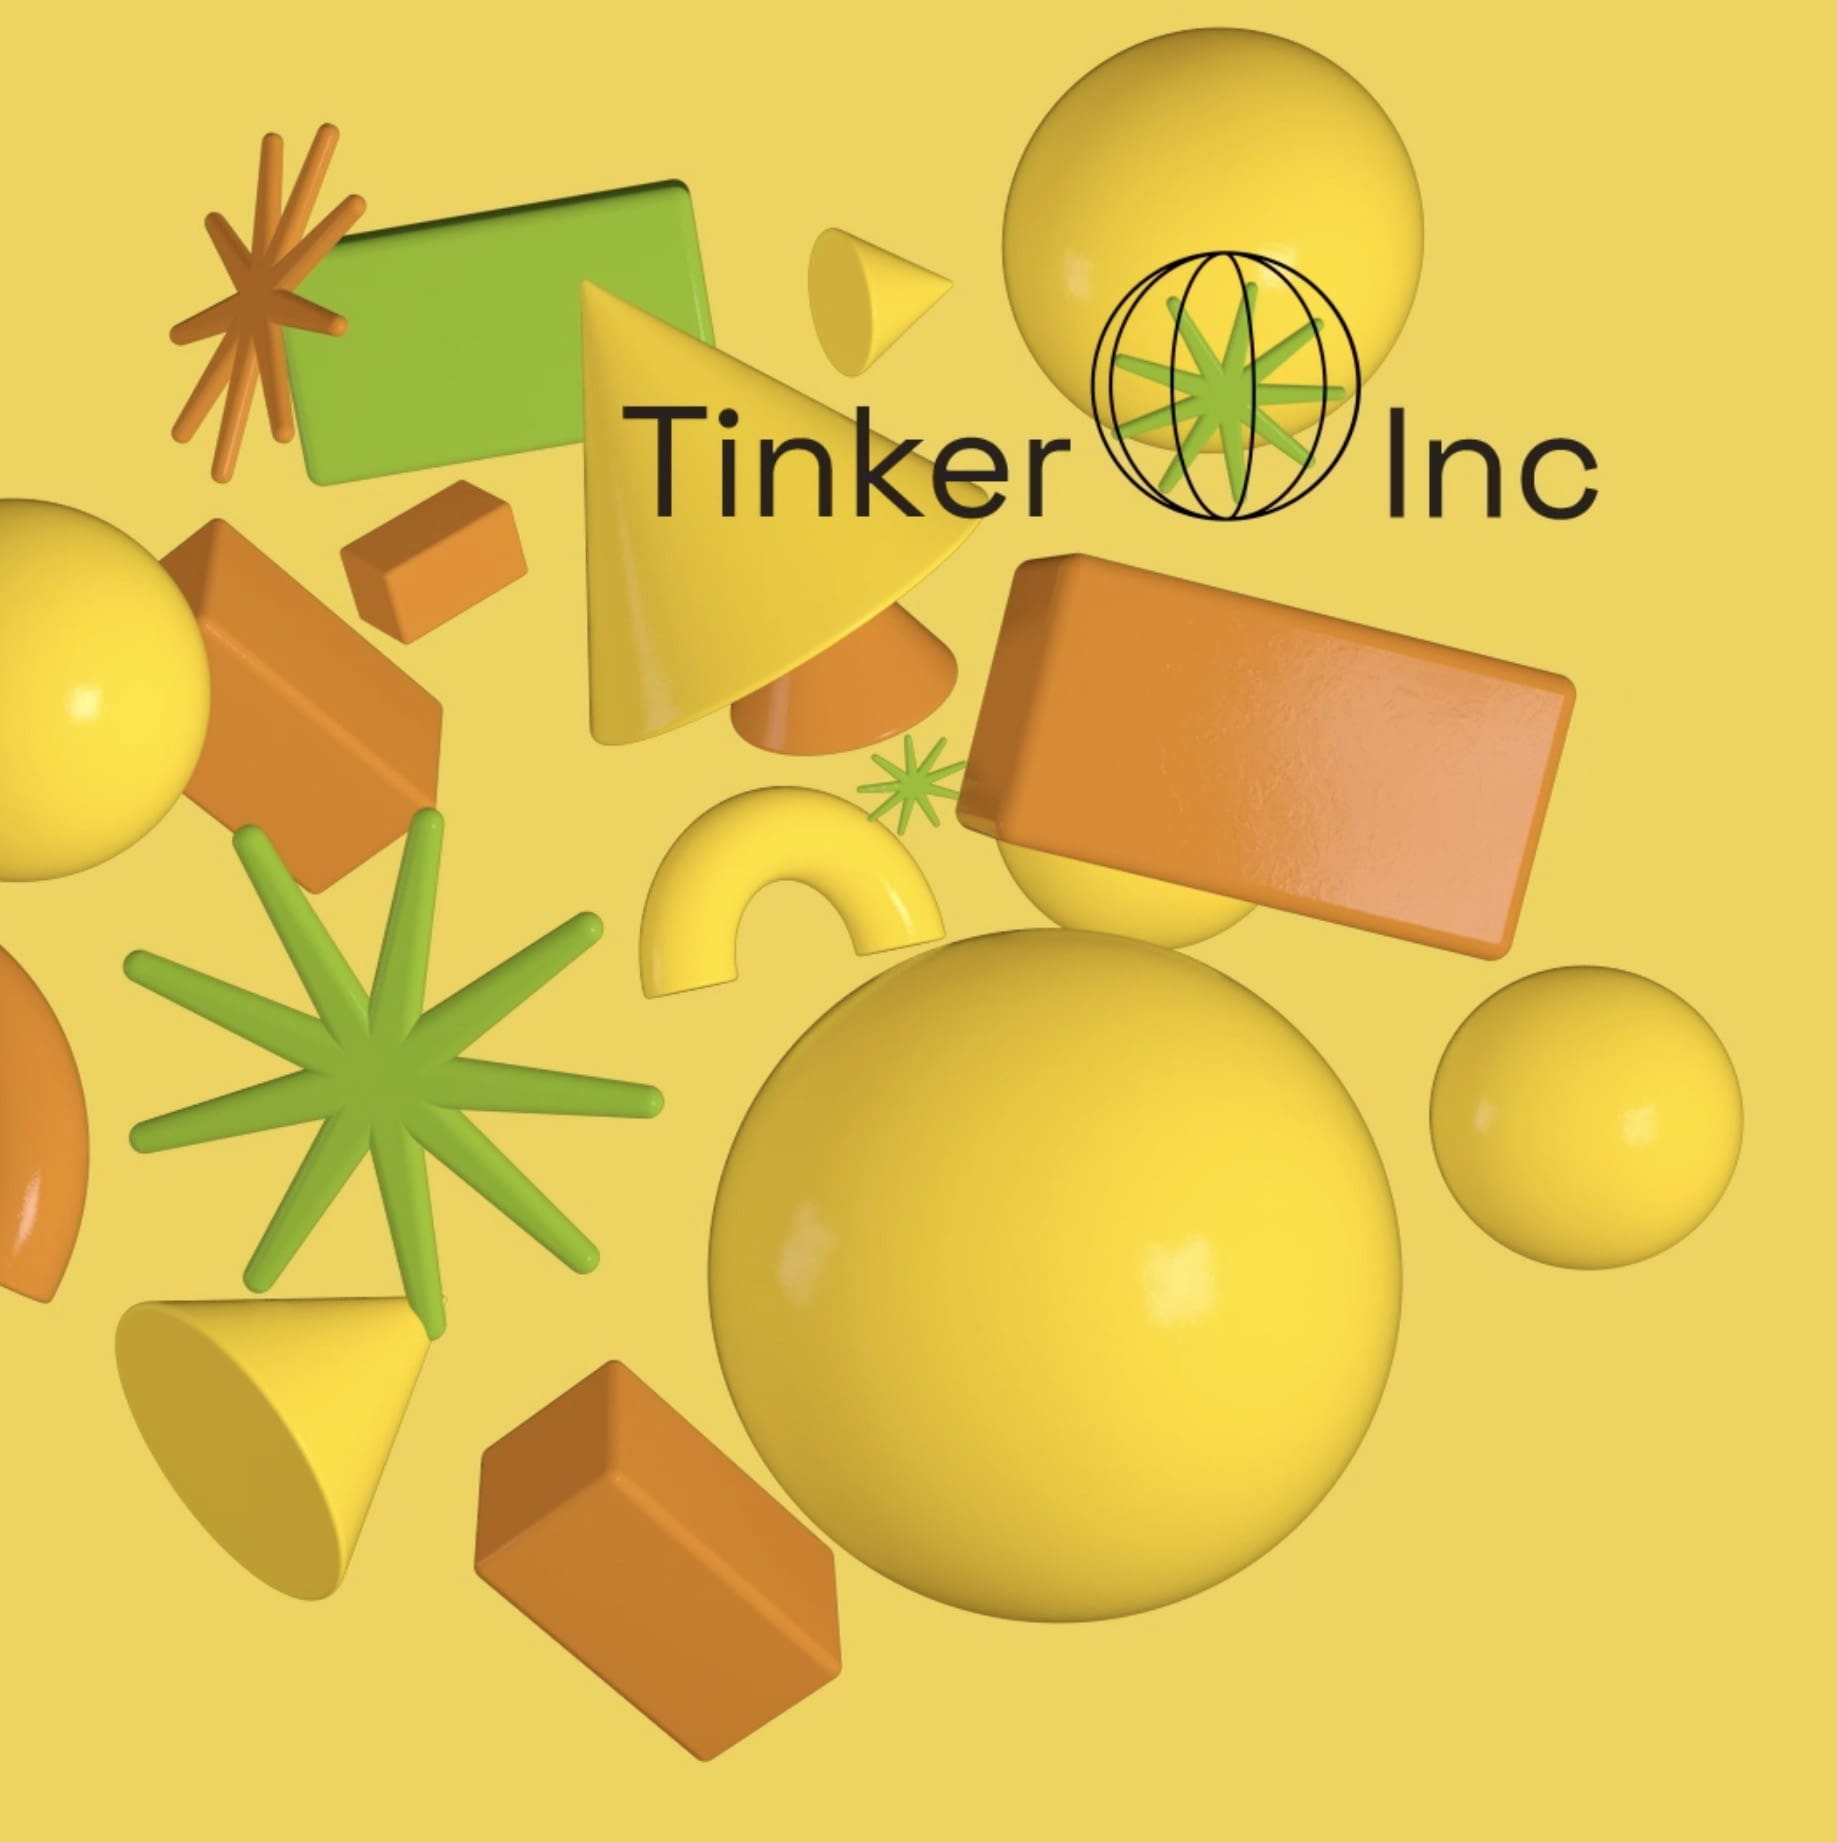 Branding for a toy-related virtual event. At the top is black text that says "Tinker Inc" against a yellow background. Behind it are several three dimensional yellow, orange, and green shapes floating in mid-air.